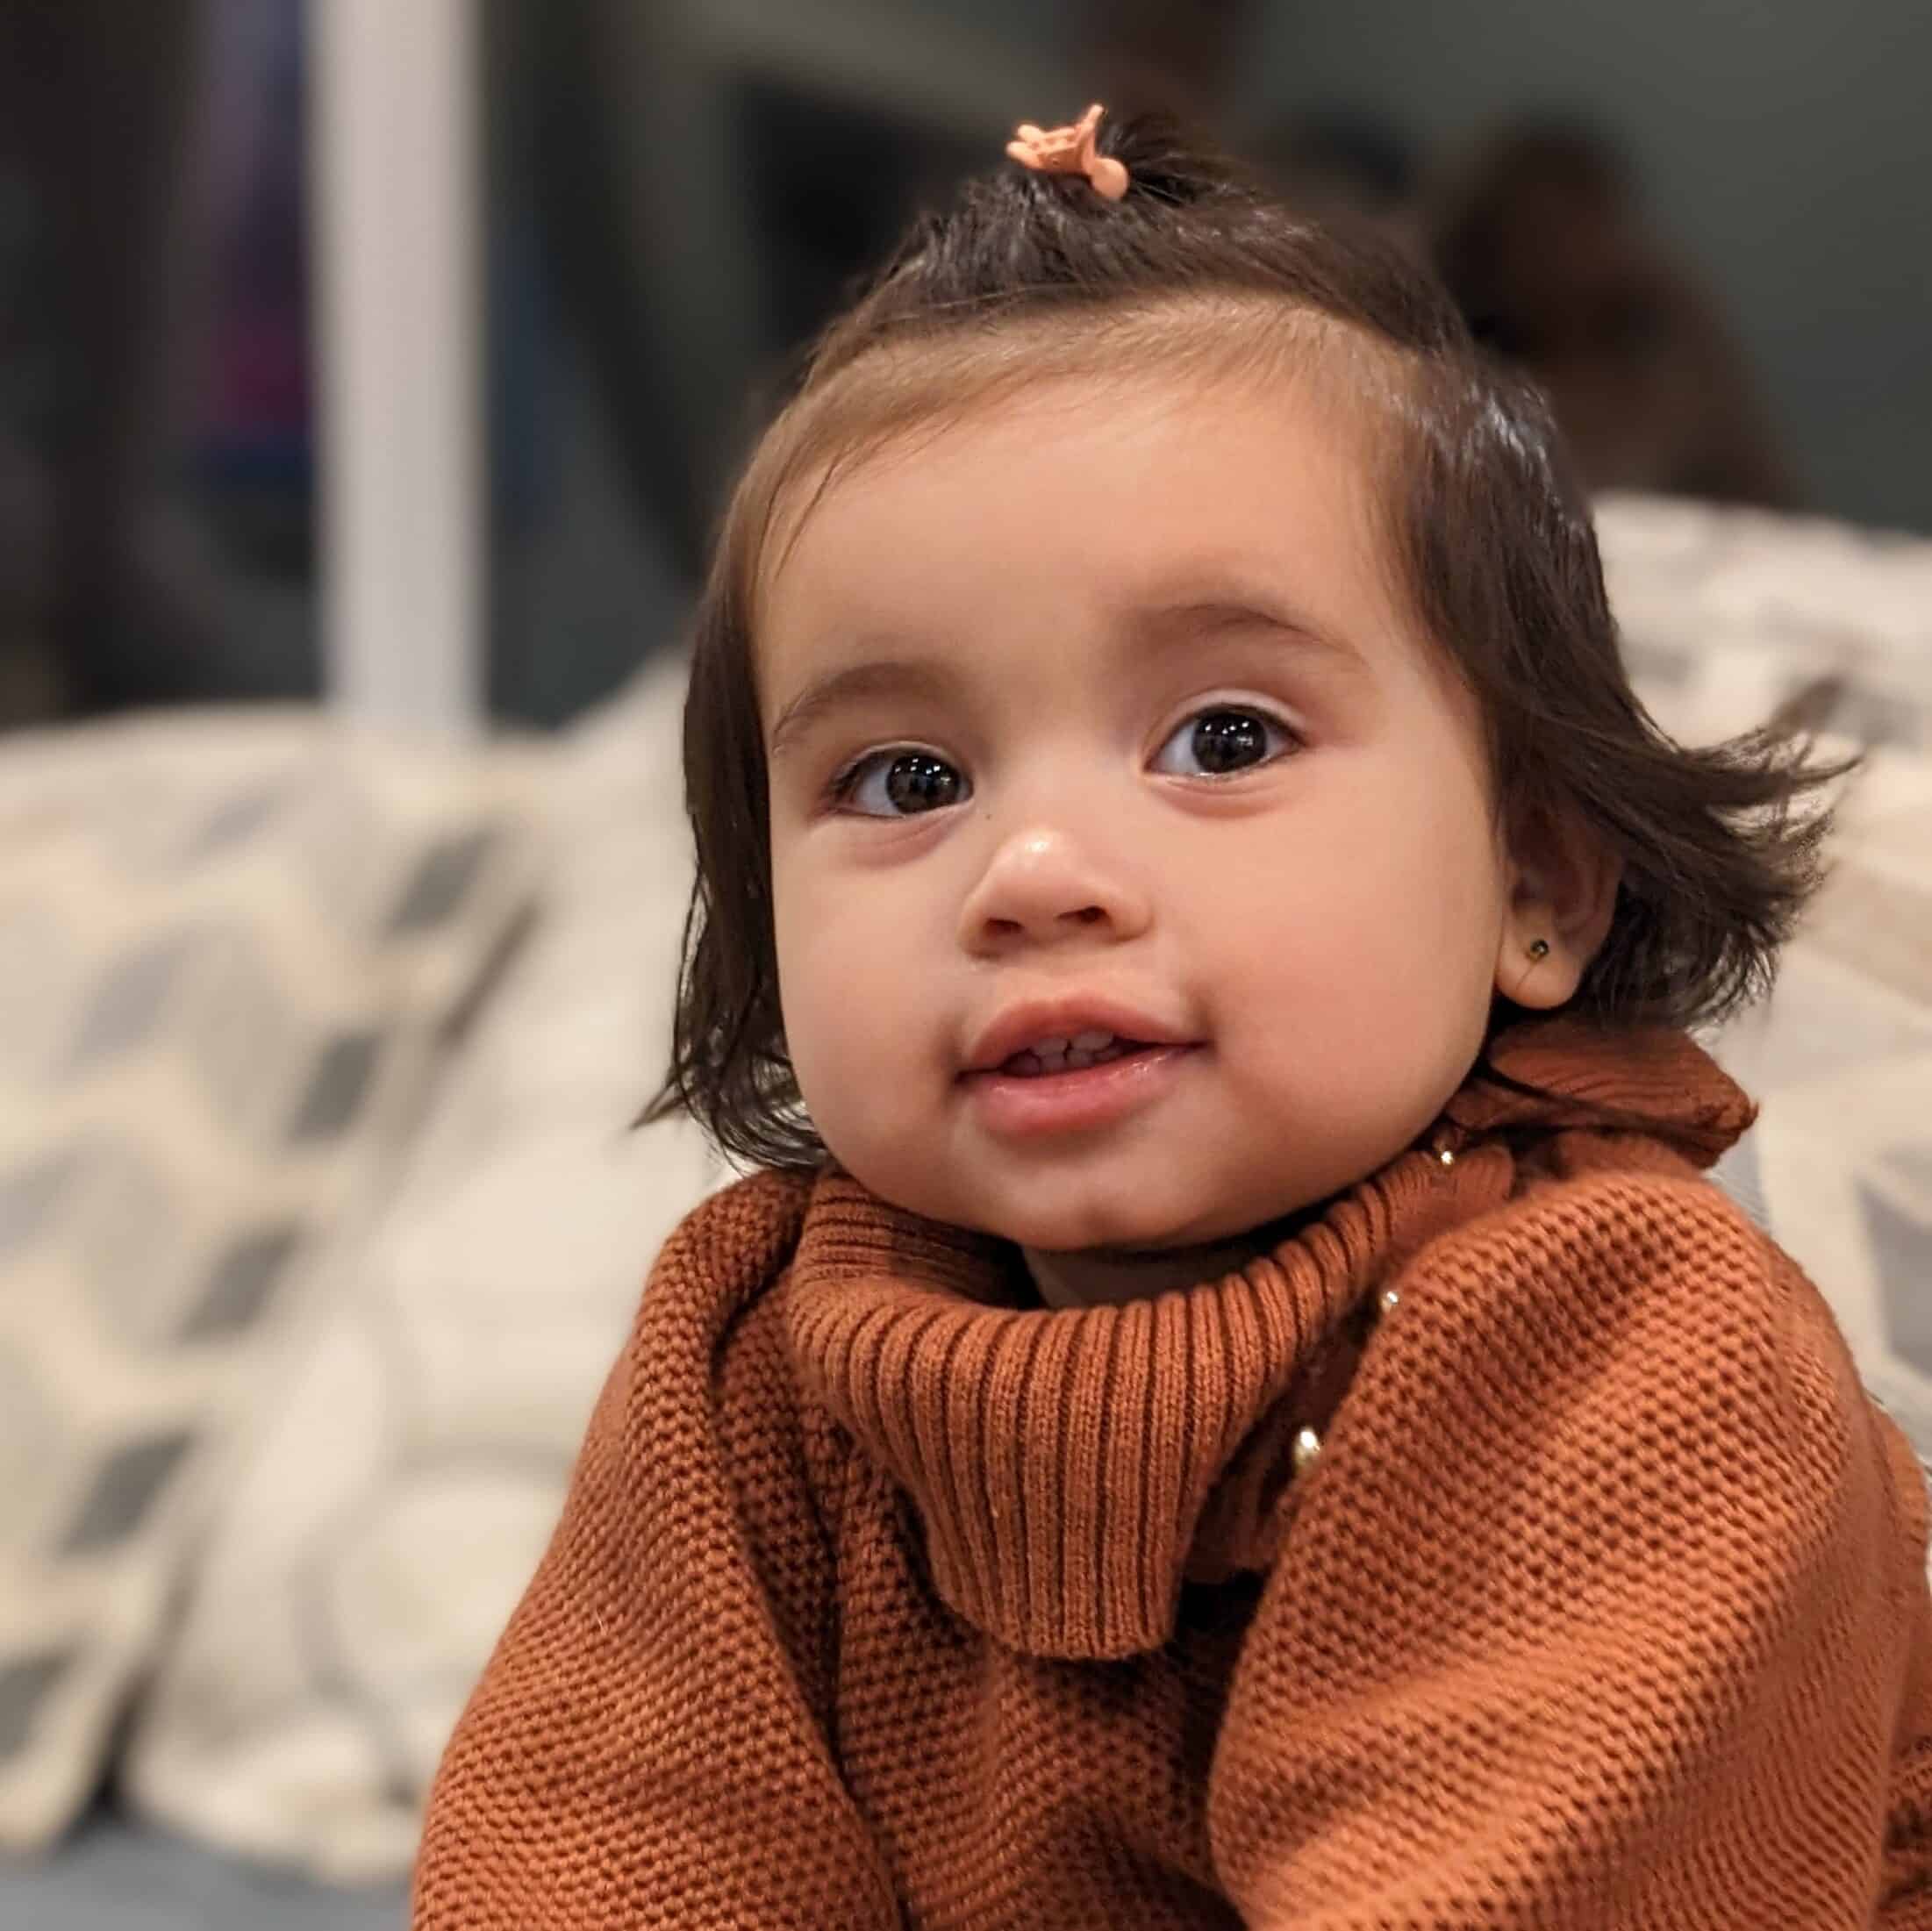 A little girl in a brown sweater sitting on a couch.